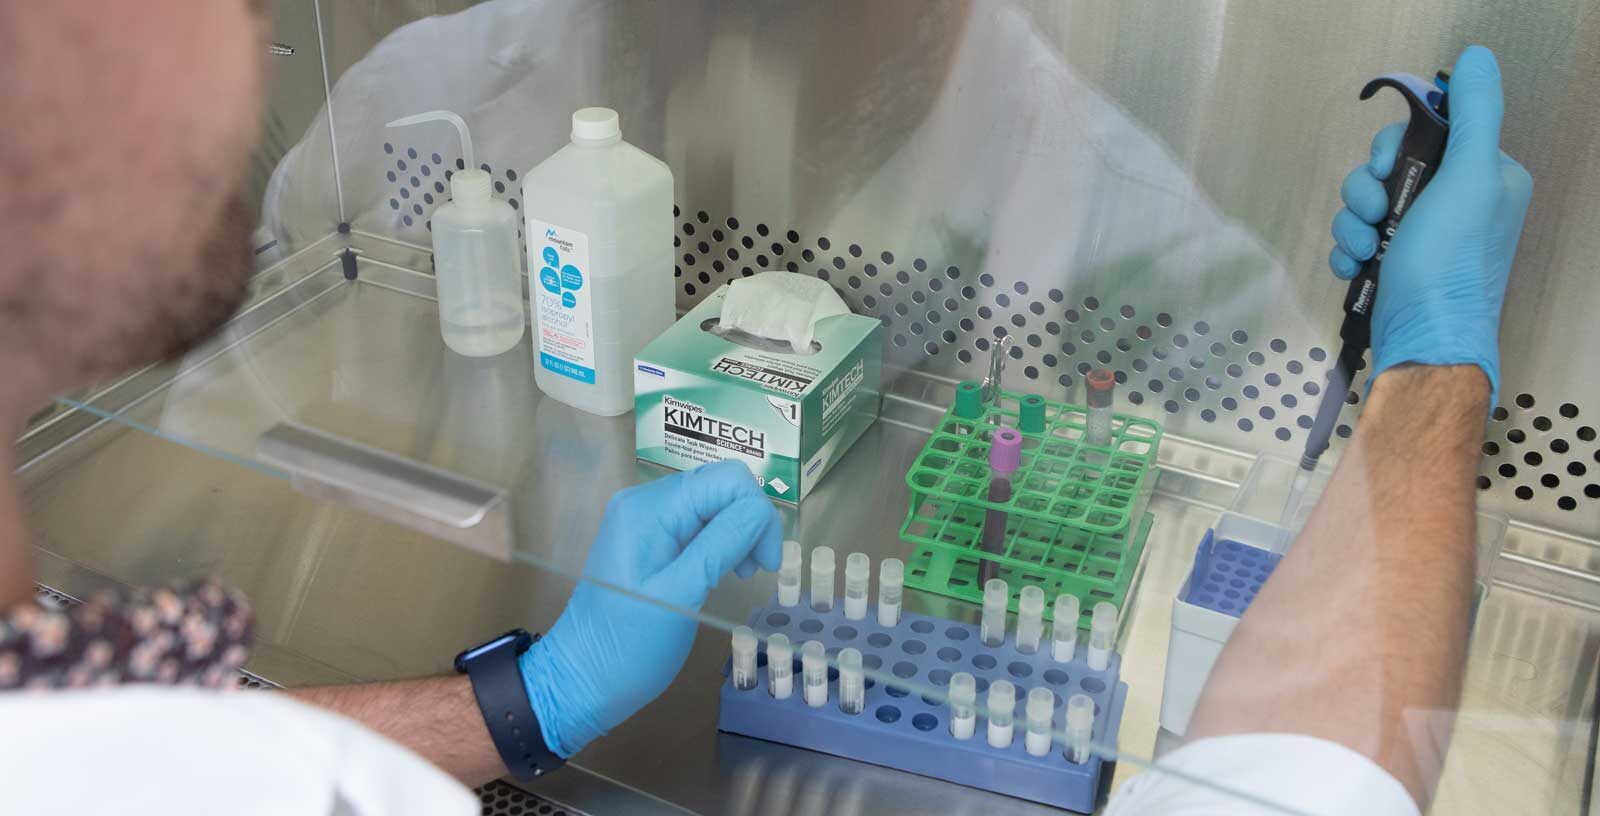 Researcher in lab using tools